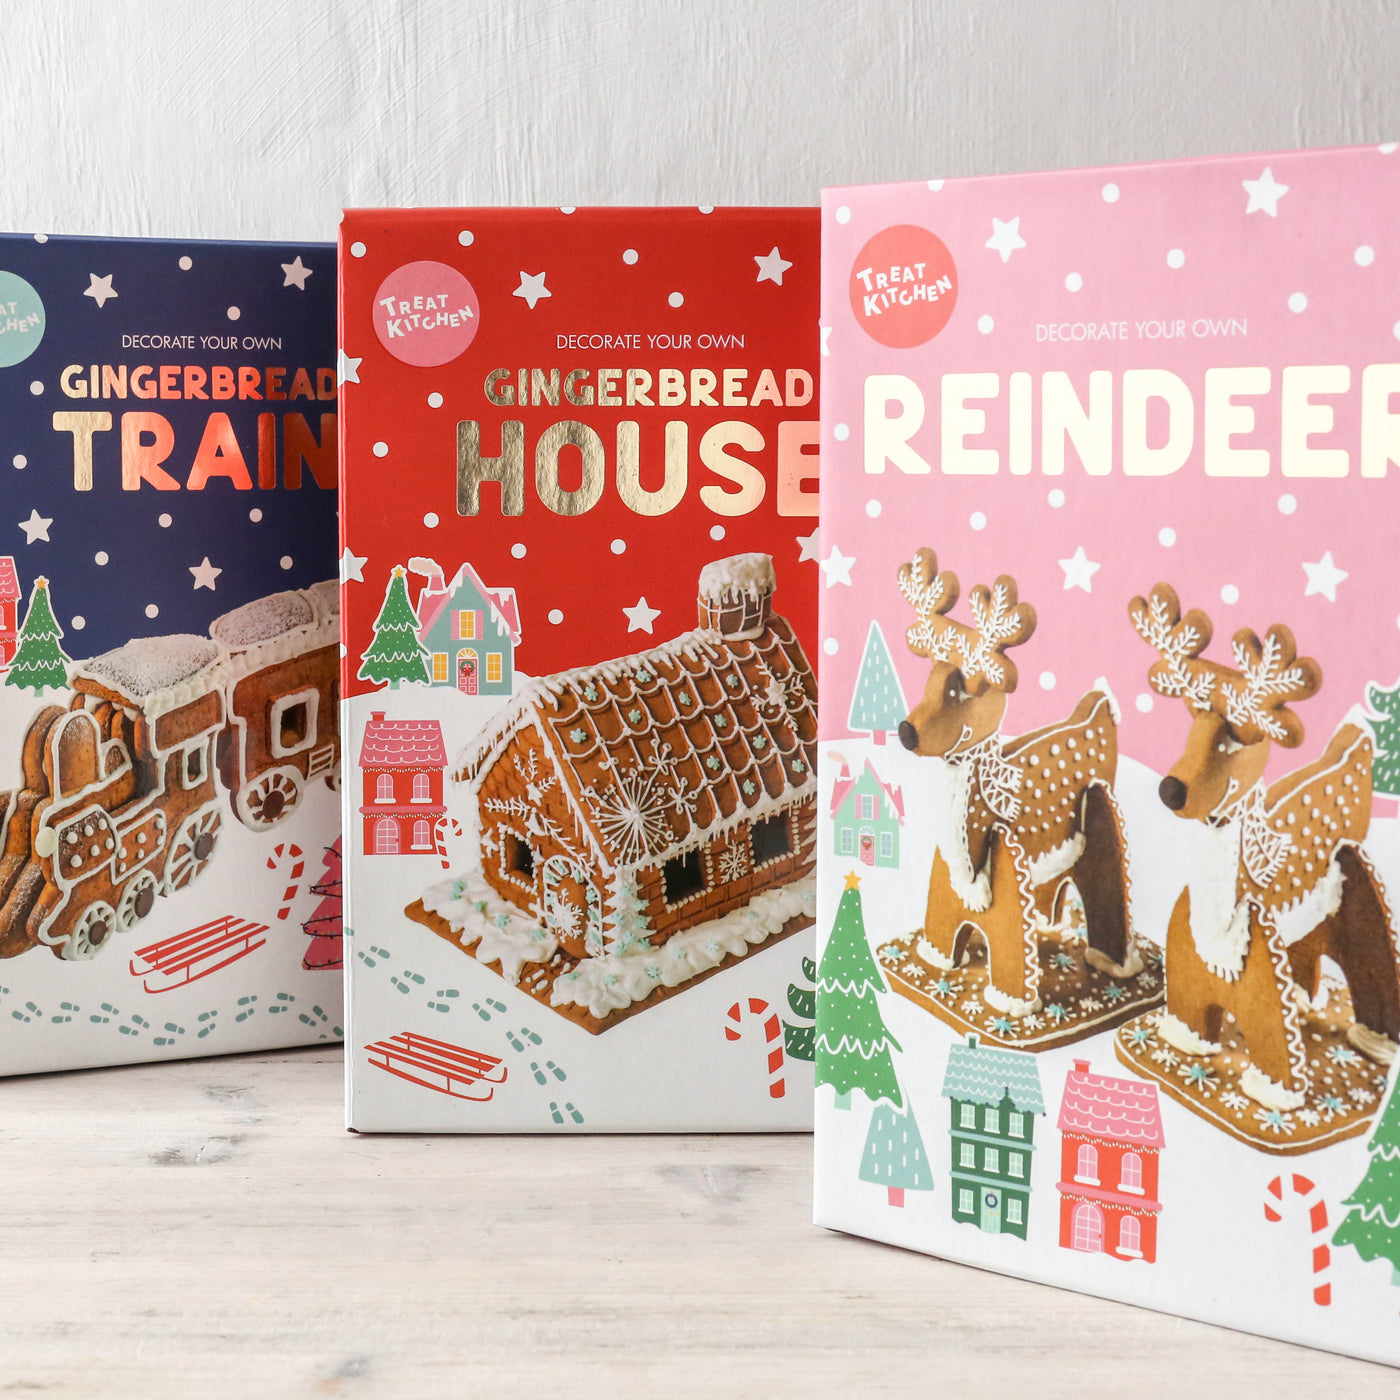 Decorate Your Own Gingerbread Train Kit